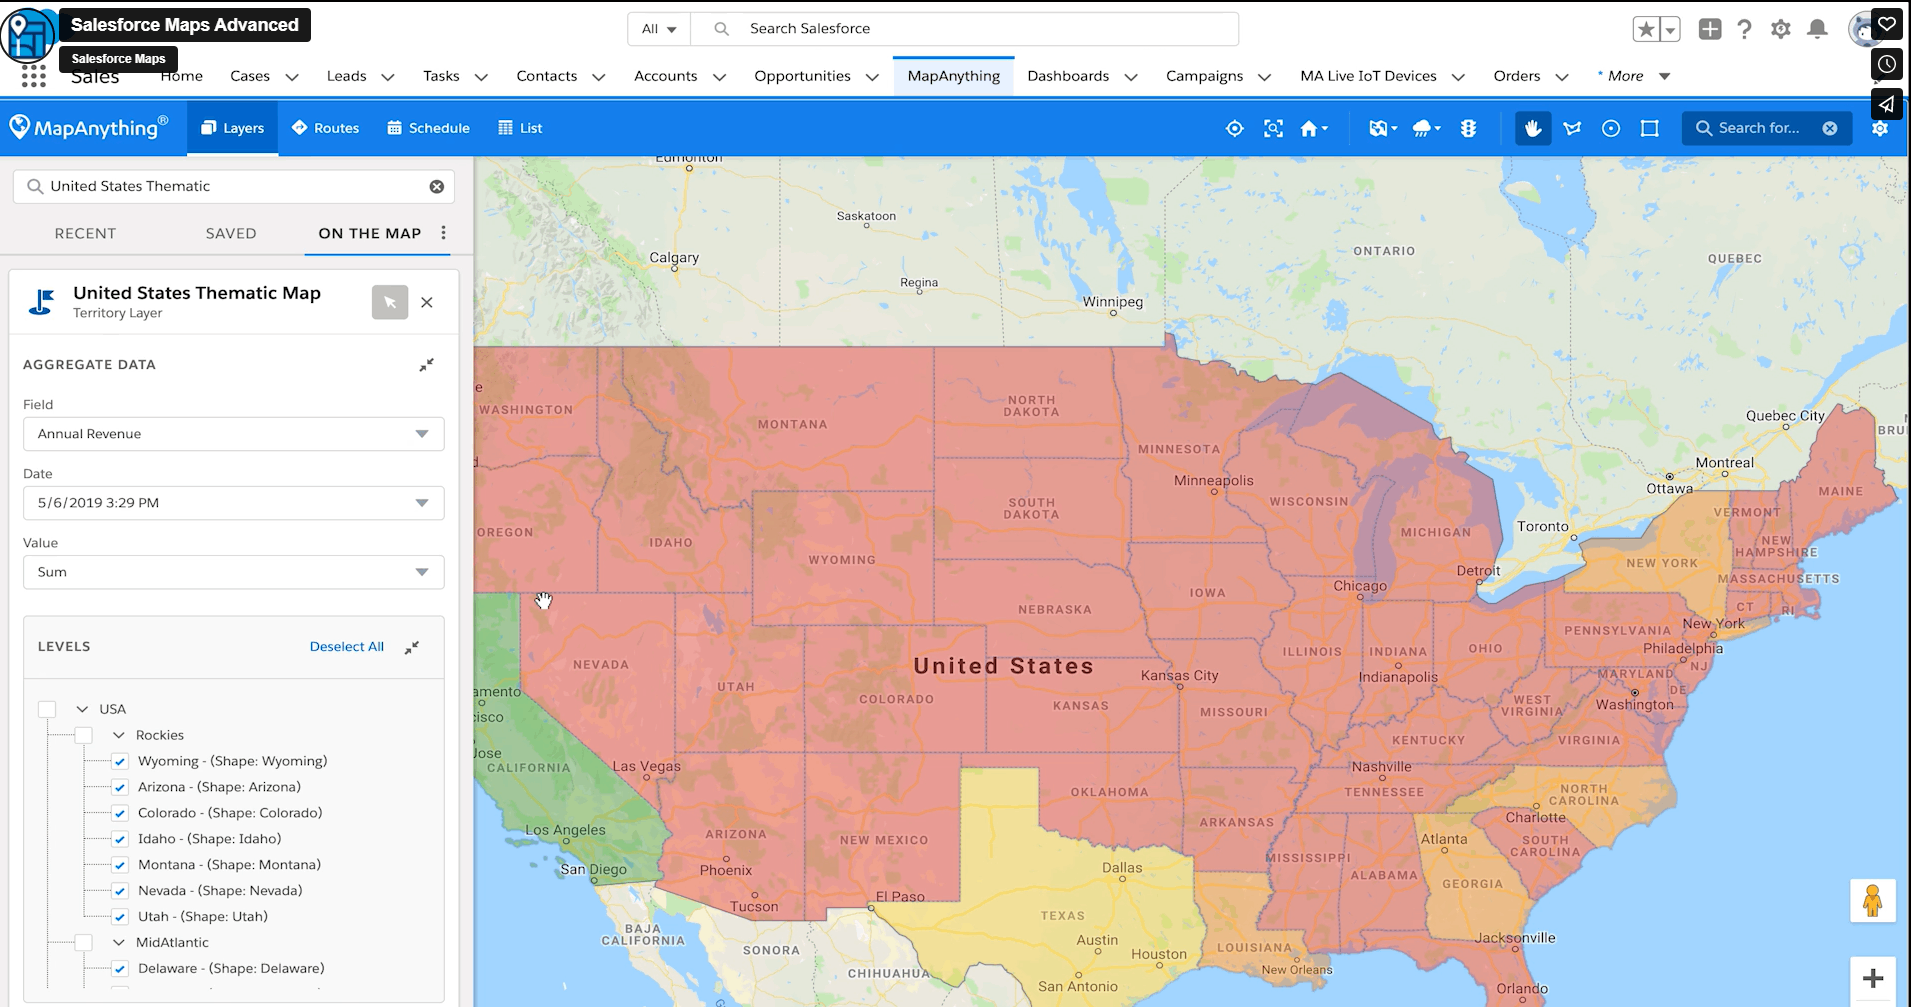 Map of US showing sales territories on Salesforce Maps.